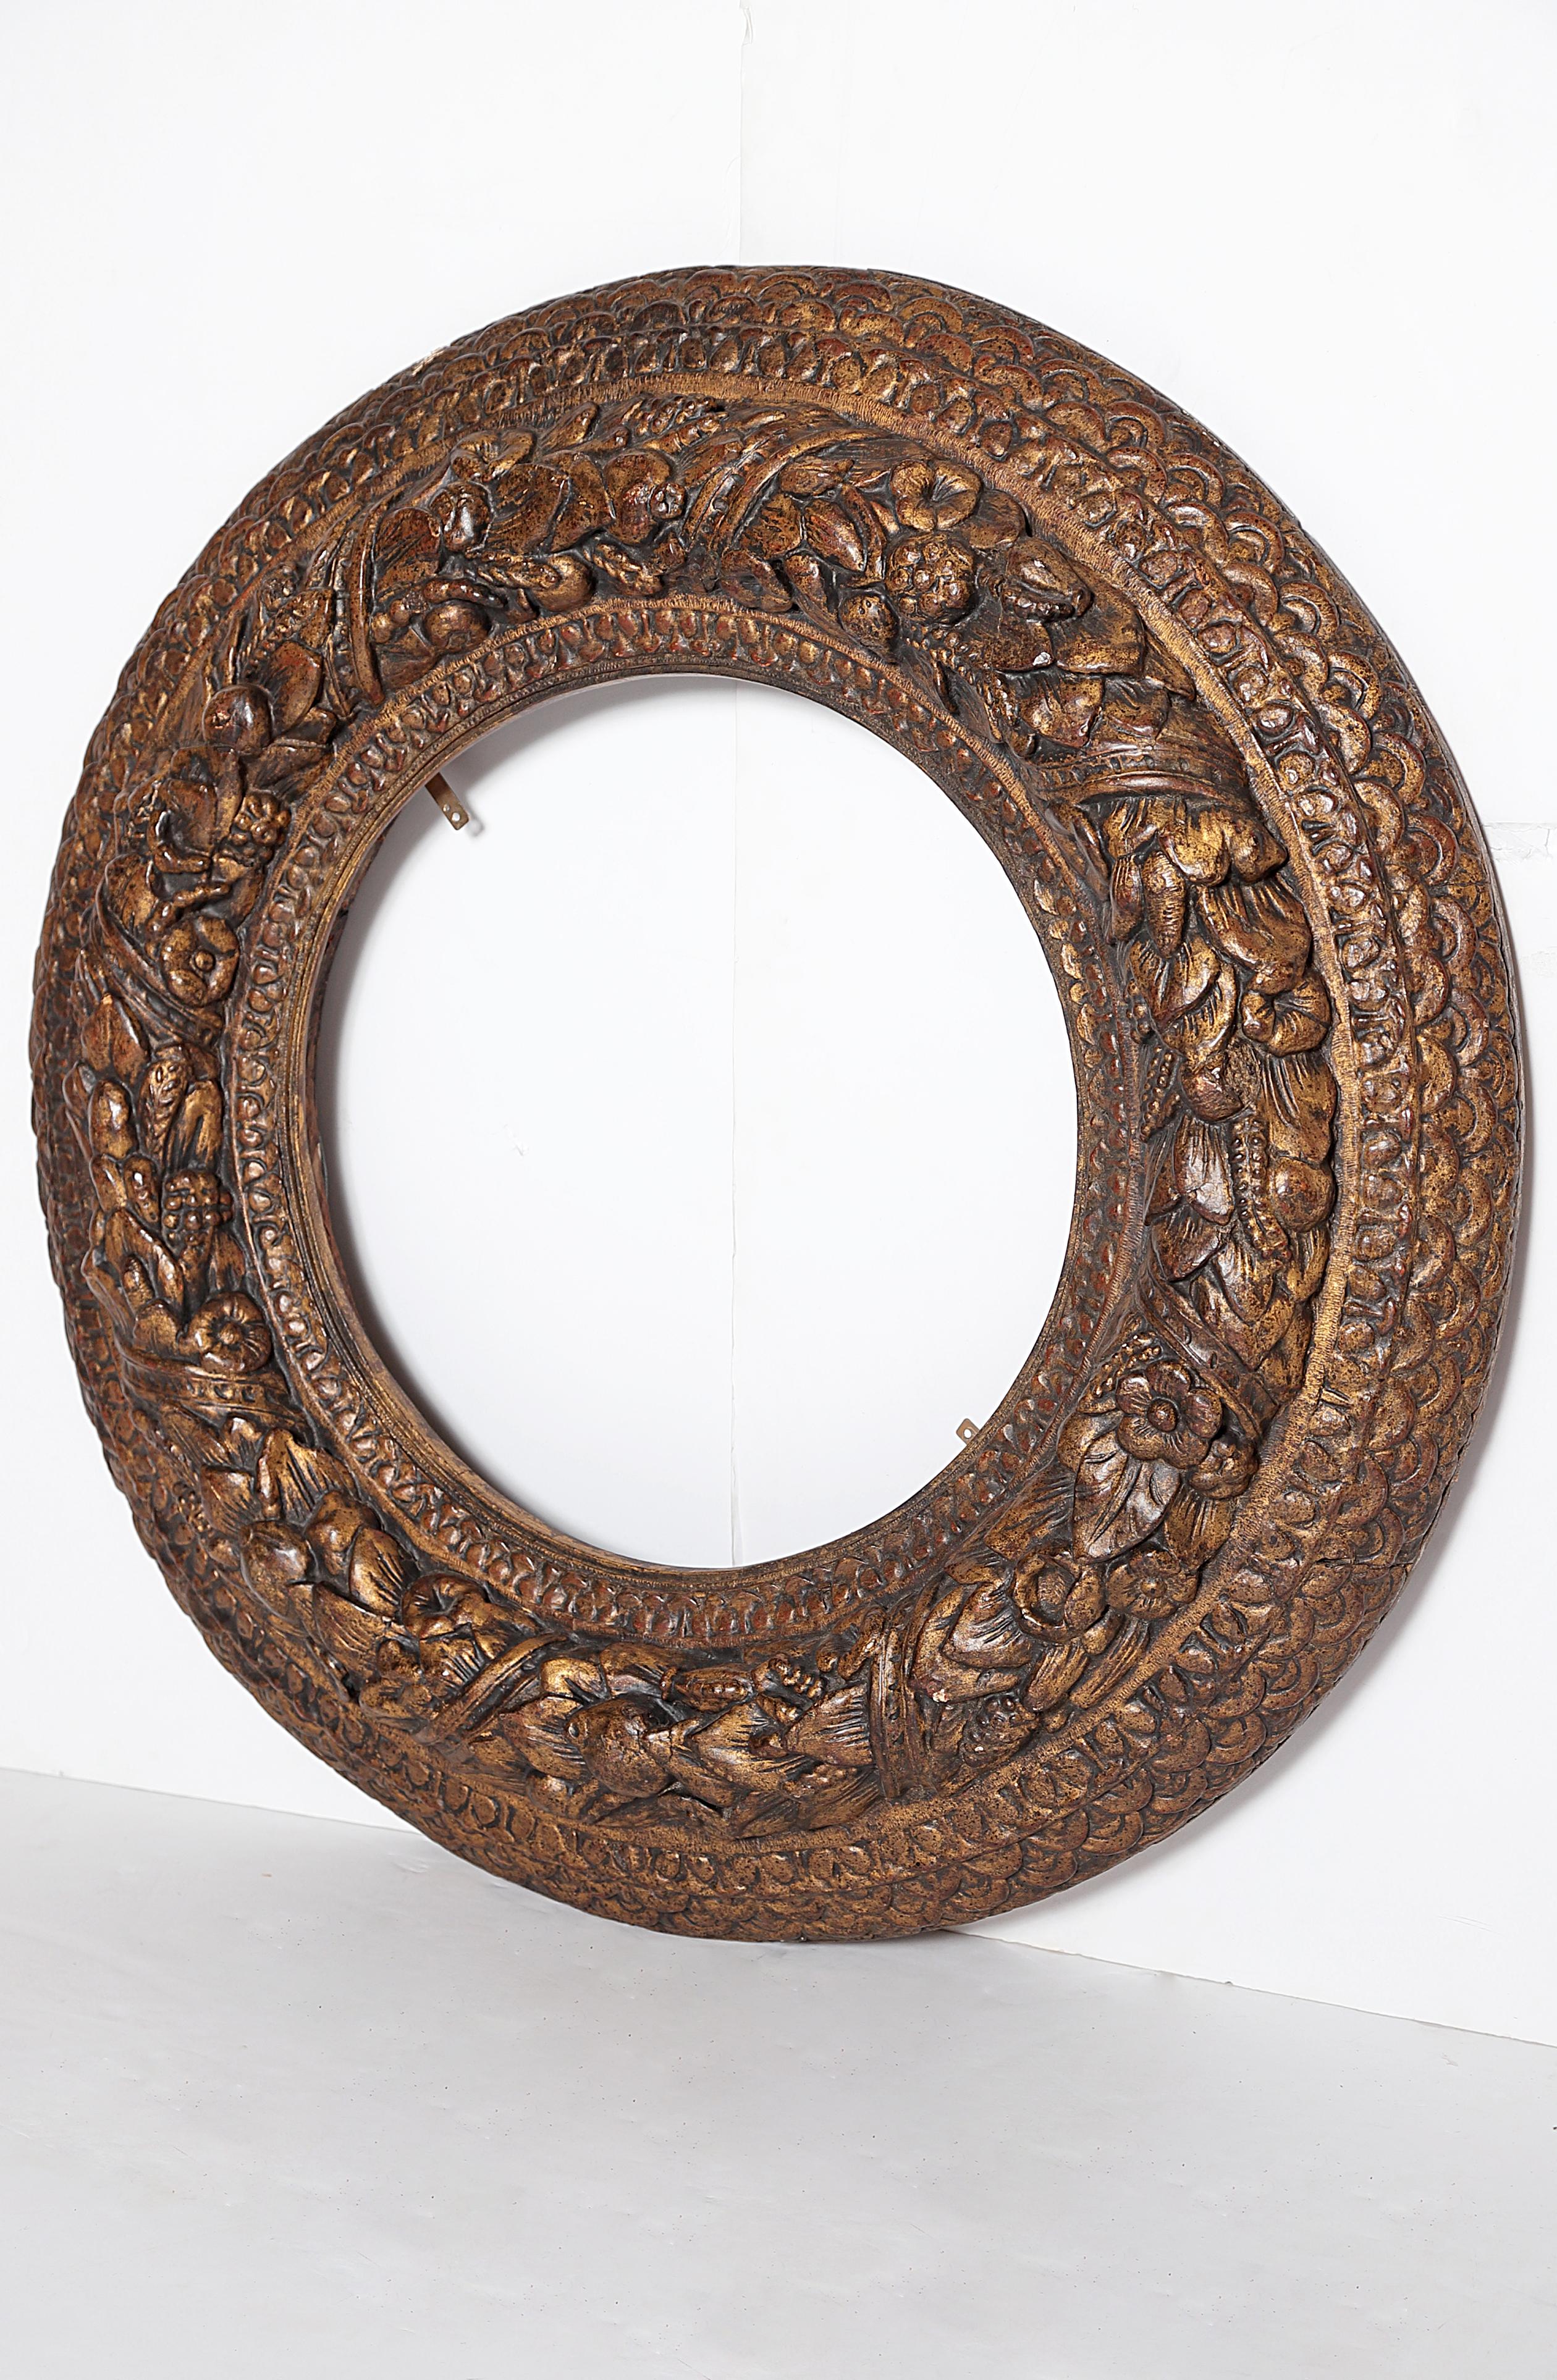 A heavily carved round picture / mirror frame, carved and gilded, rows of geometric and floral carvings, central circle has wheat sheaves embellished with flowers, Italian, late 17th century

Measures: 4.25